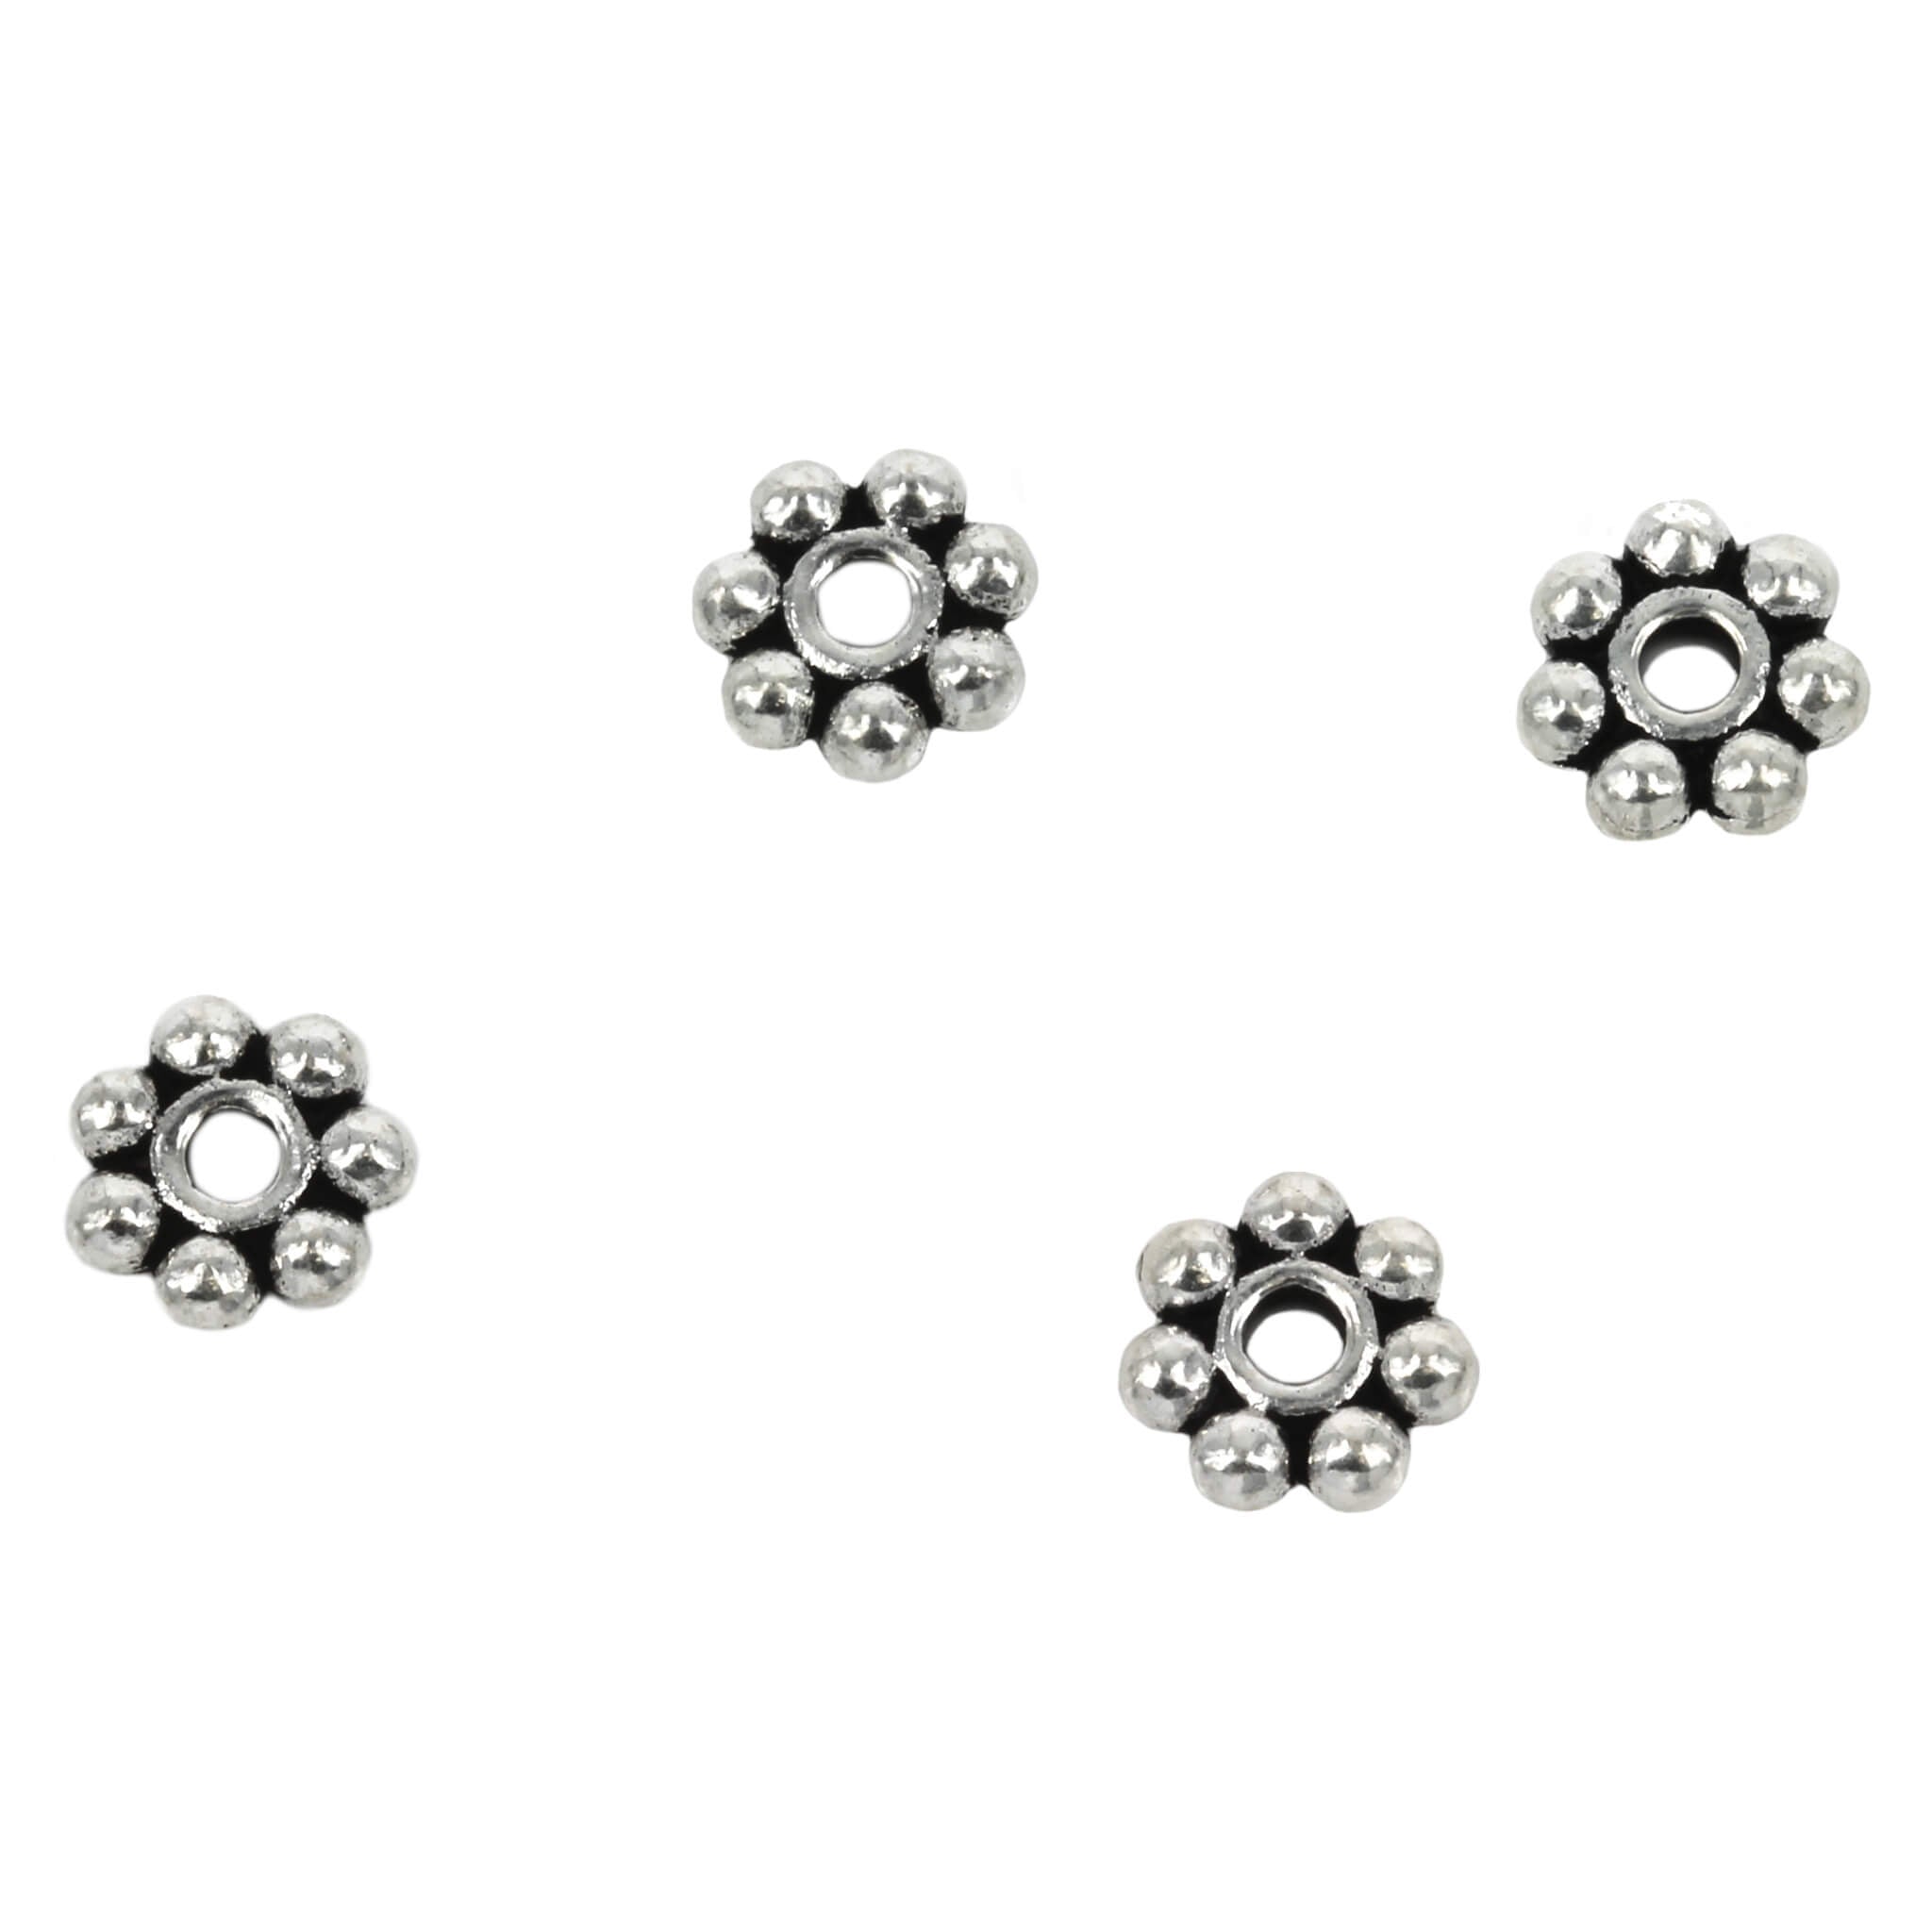 Bali-Style Daisy Spacer Bead in Sterling Silver 8x2mm